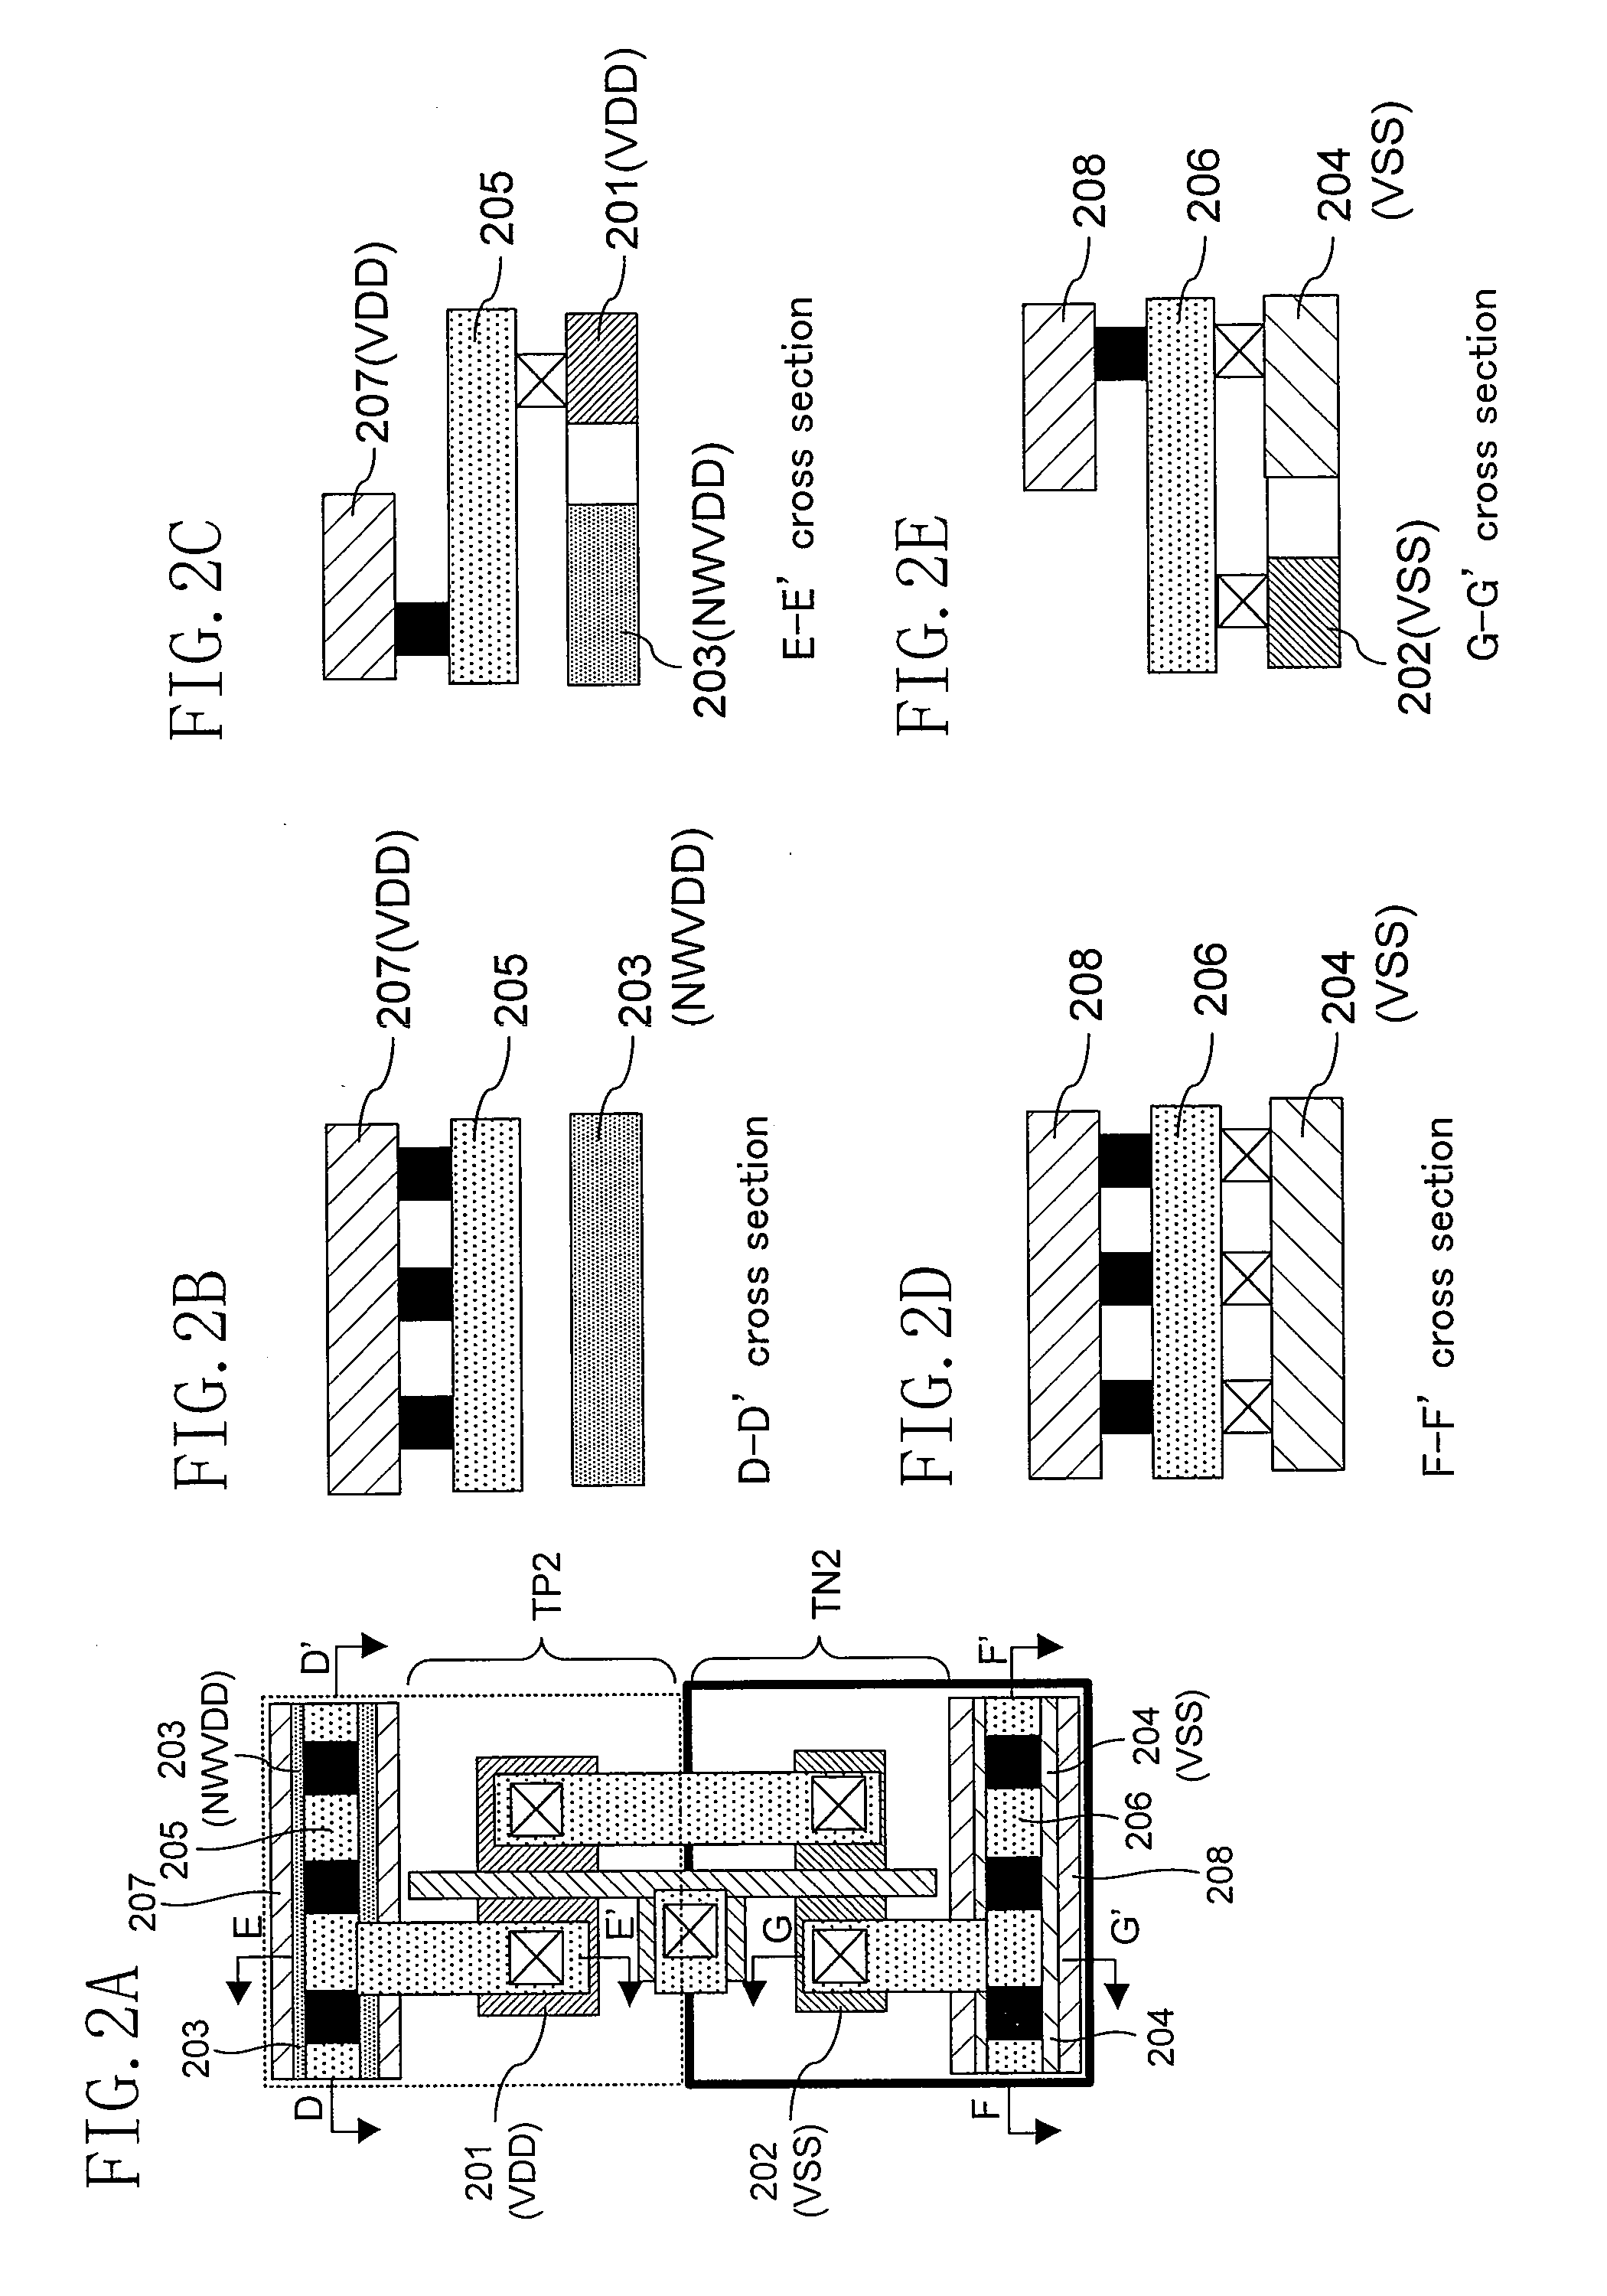 Layout structure of semiconductor device